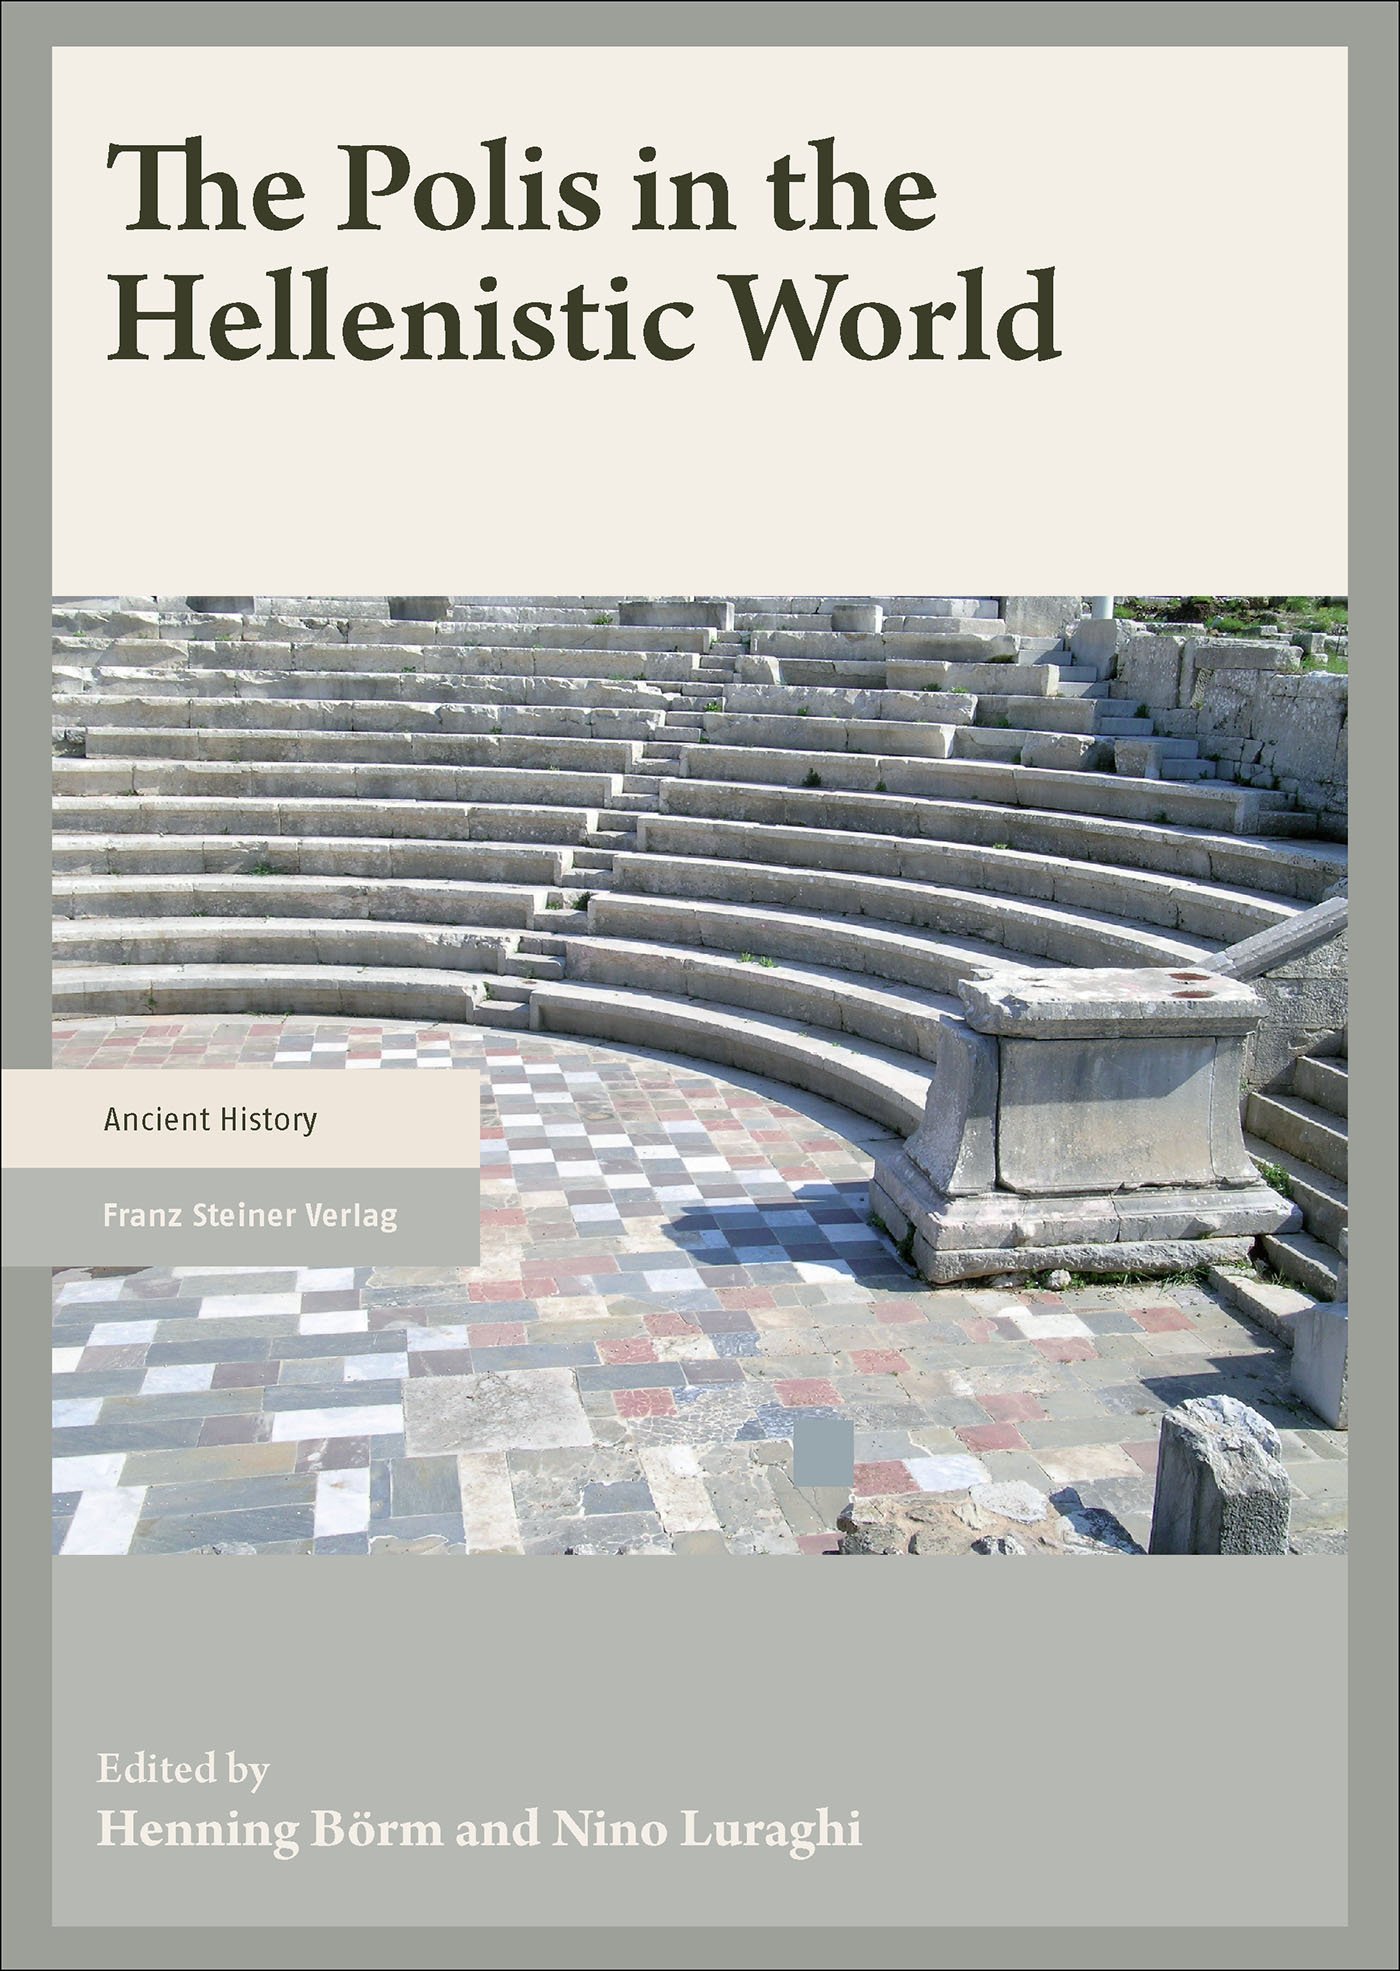 The Polis in the Hellenistic World